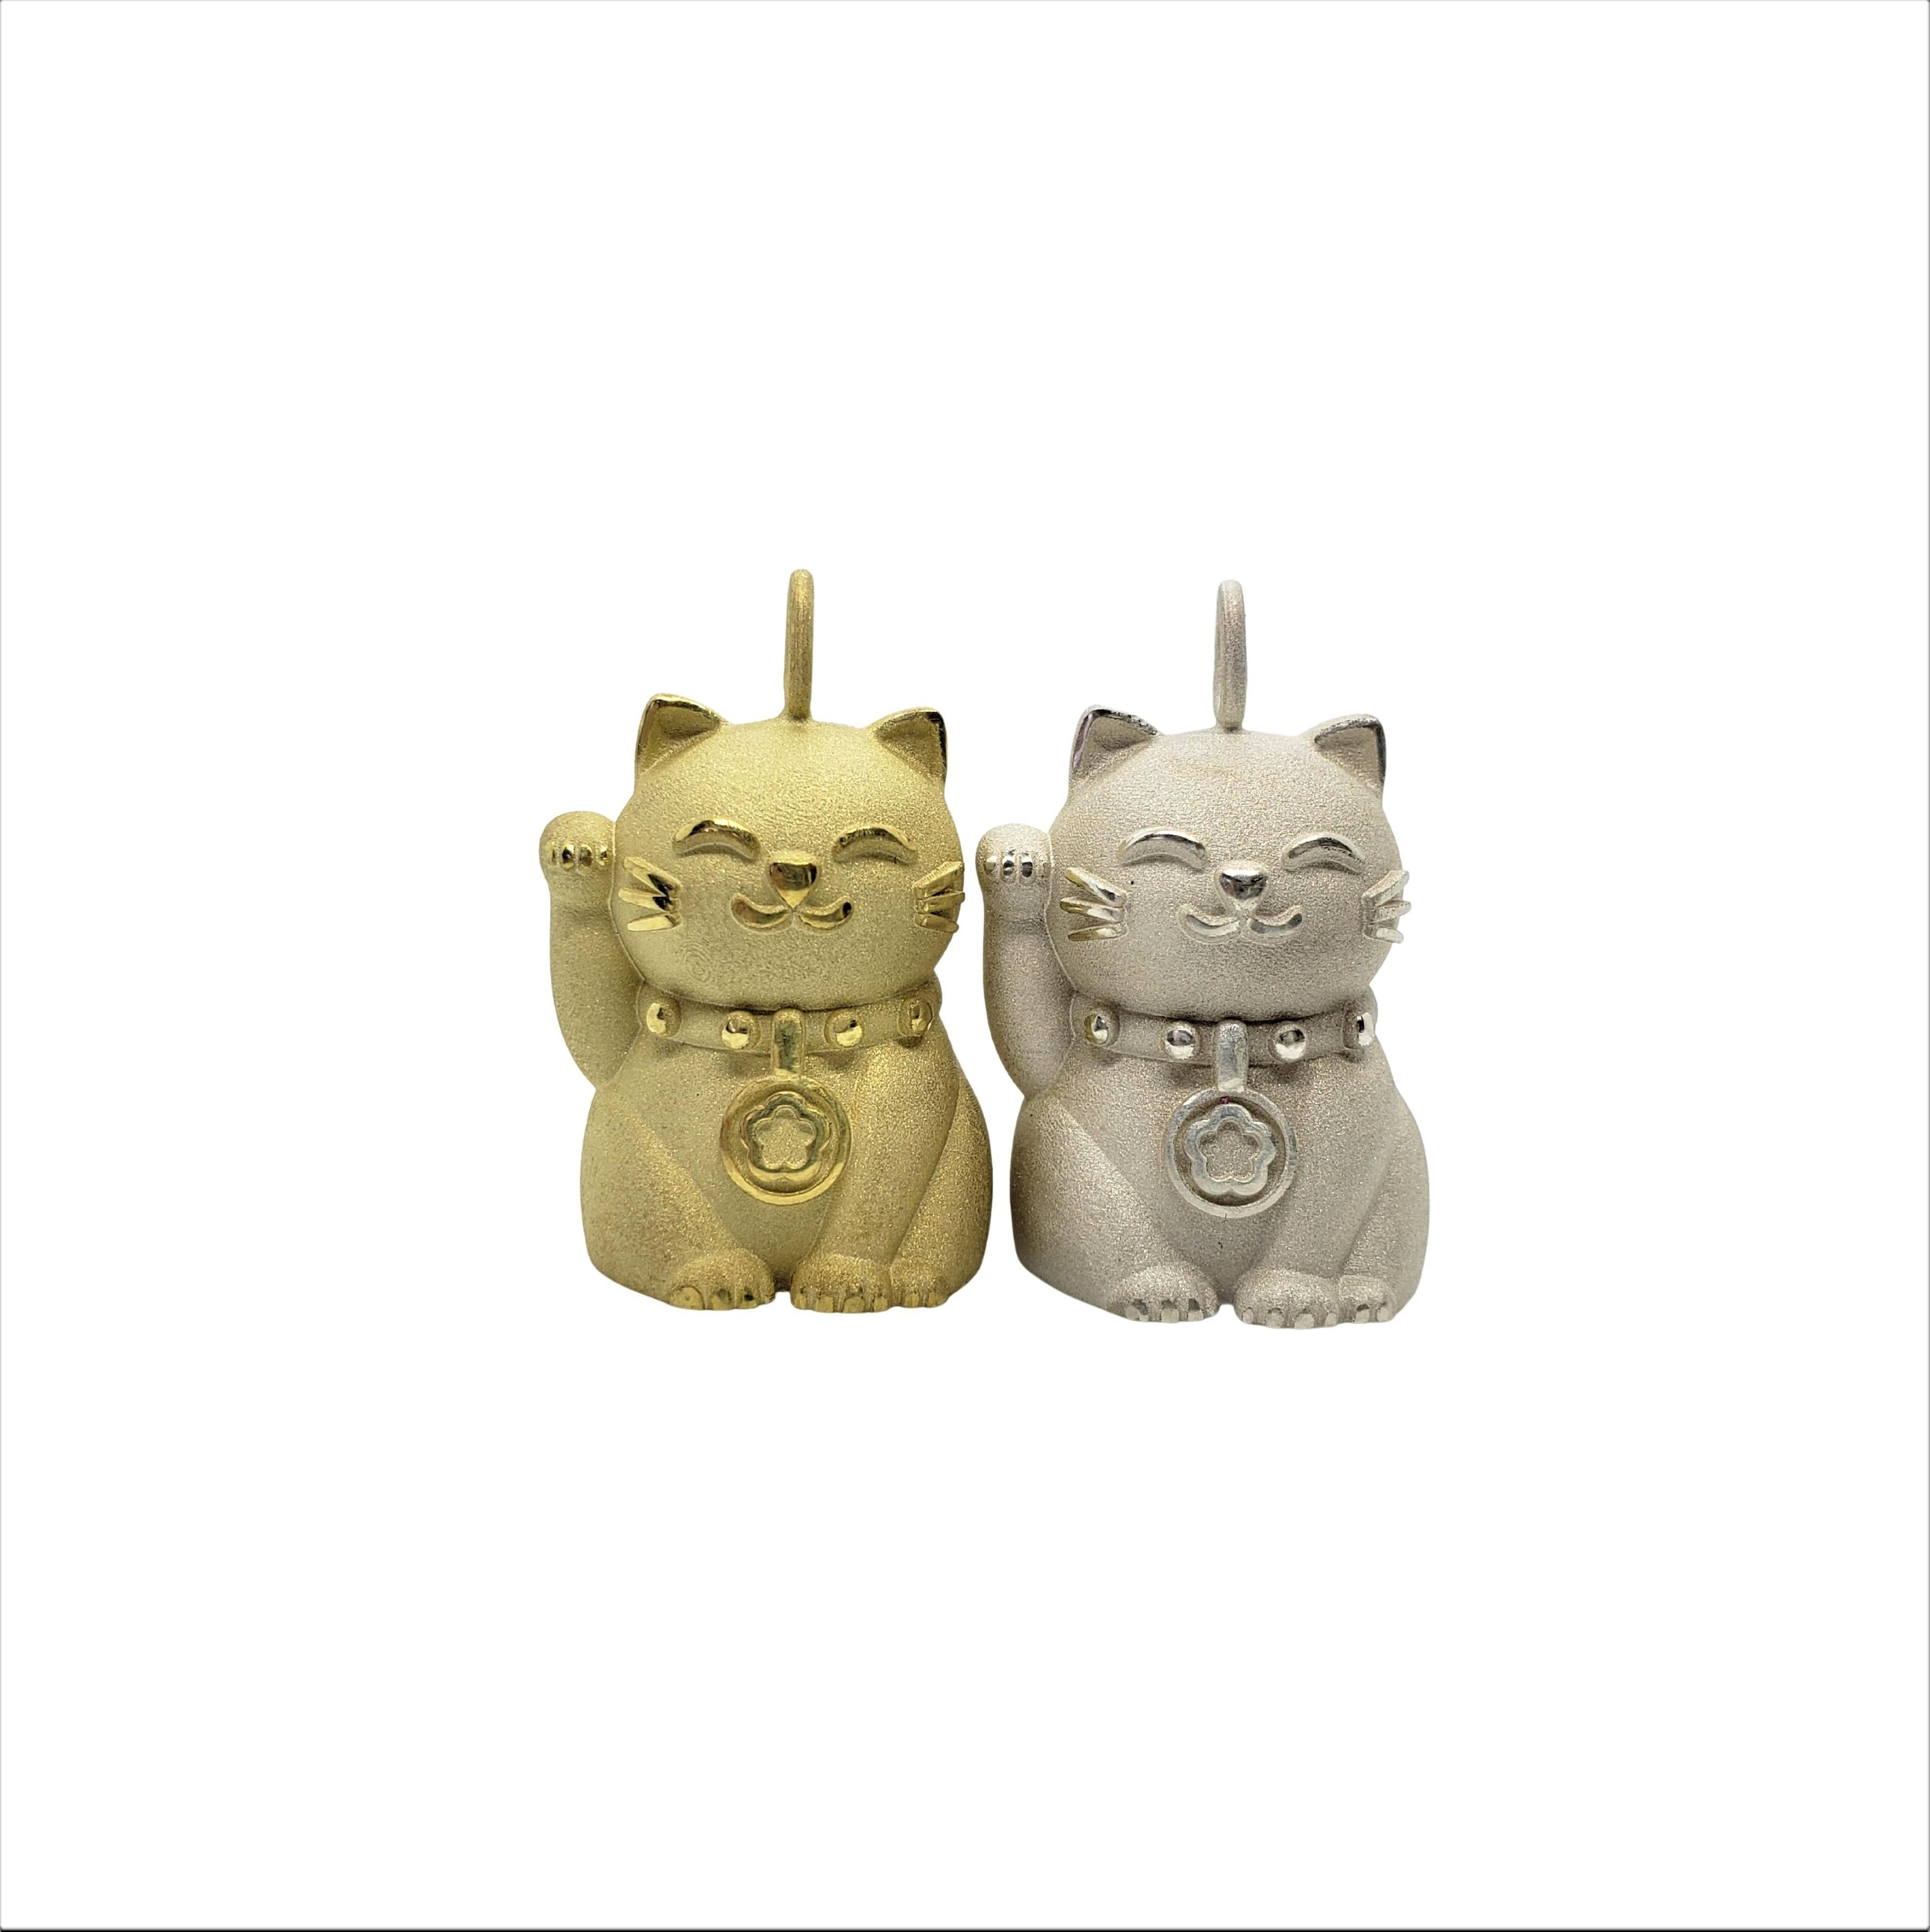 Mini Hope Cat in Sterling Silver is a perfect charm size and the addition of 18K Gold Plating gives a richness. The Maneki Neko is well known to be a Japanese welcoming Cat symbolizing prosperity, love, luck, happiness, inclusiveness, all trait we